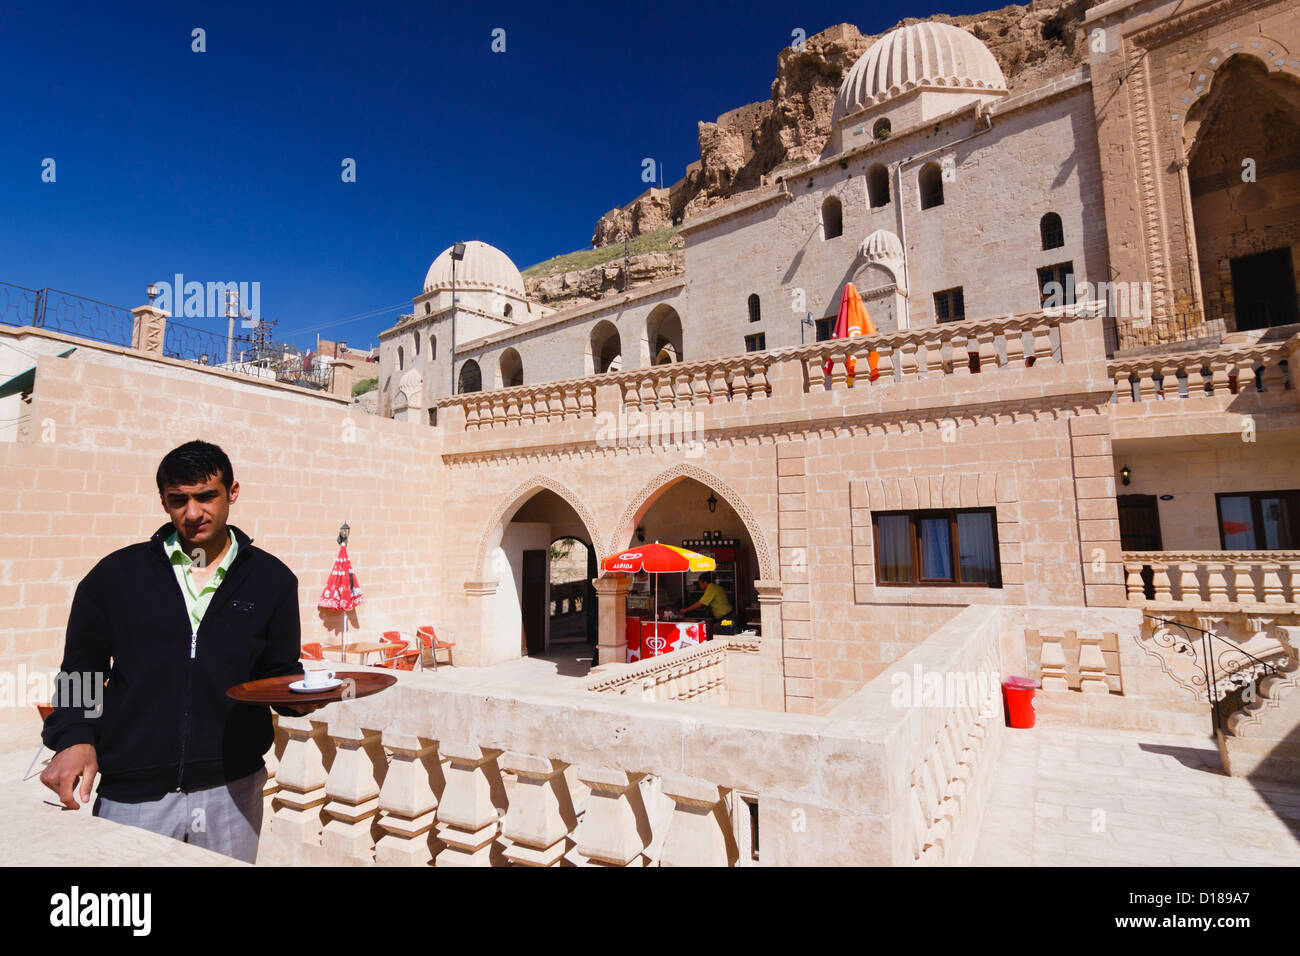 Waiter at the terrace of a cafe inside the historic post office building next to Sultan Isa Medresesi in Mardin, Southeast Turkey Stock Photo